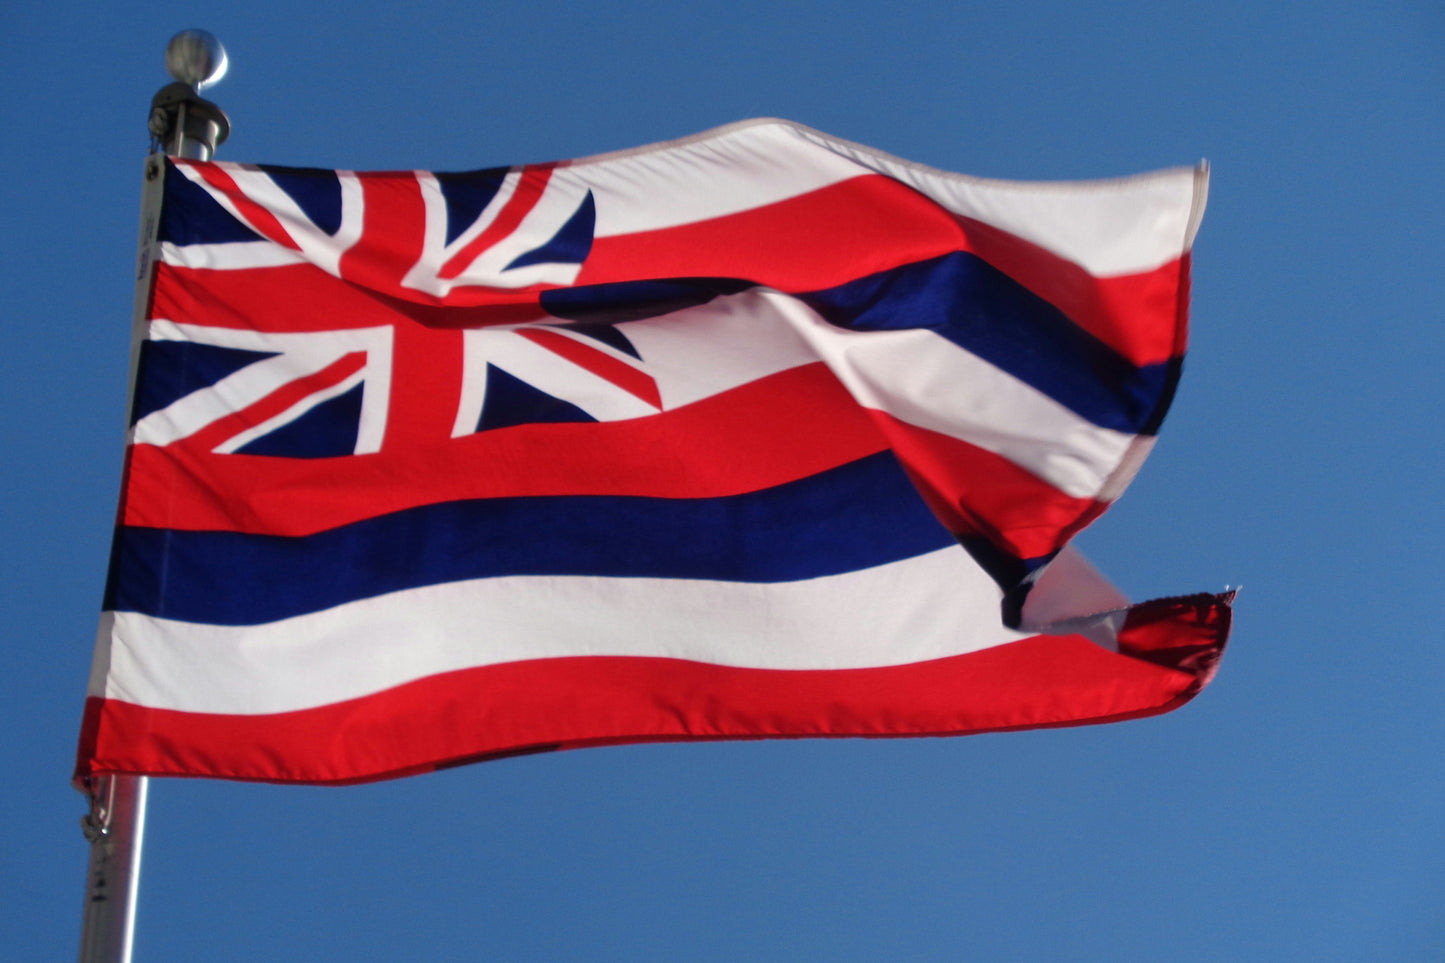 A photo of the flag of Hawaii flying on a flag pole with a blue sky in the background.